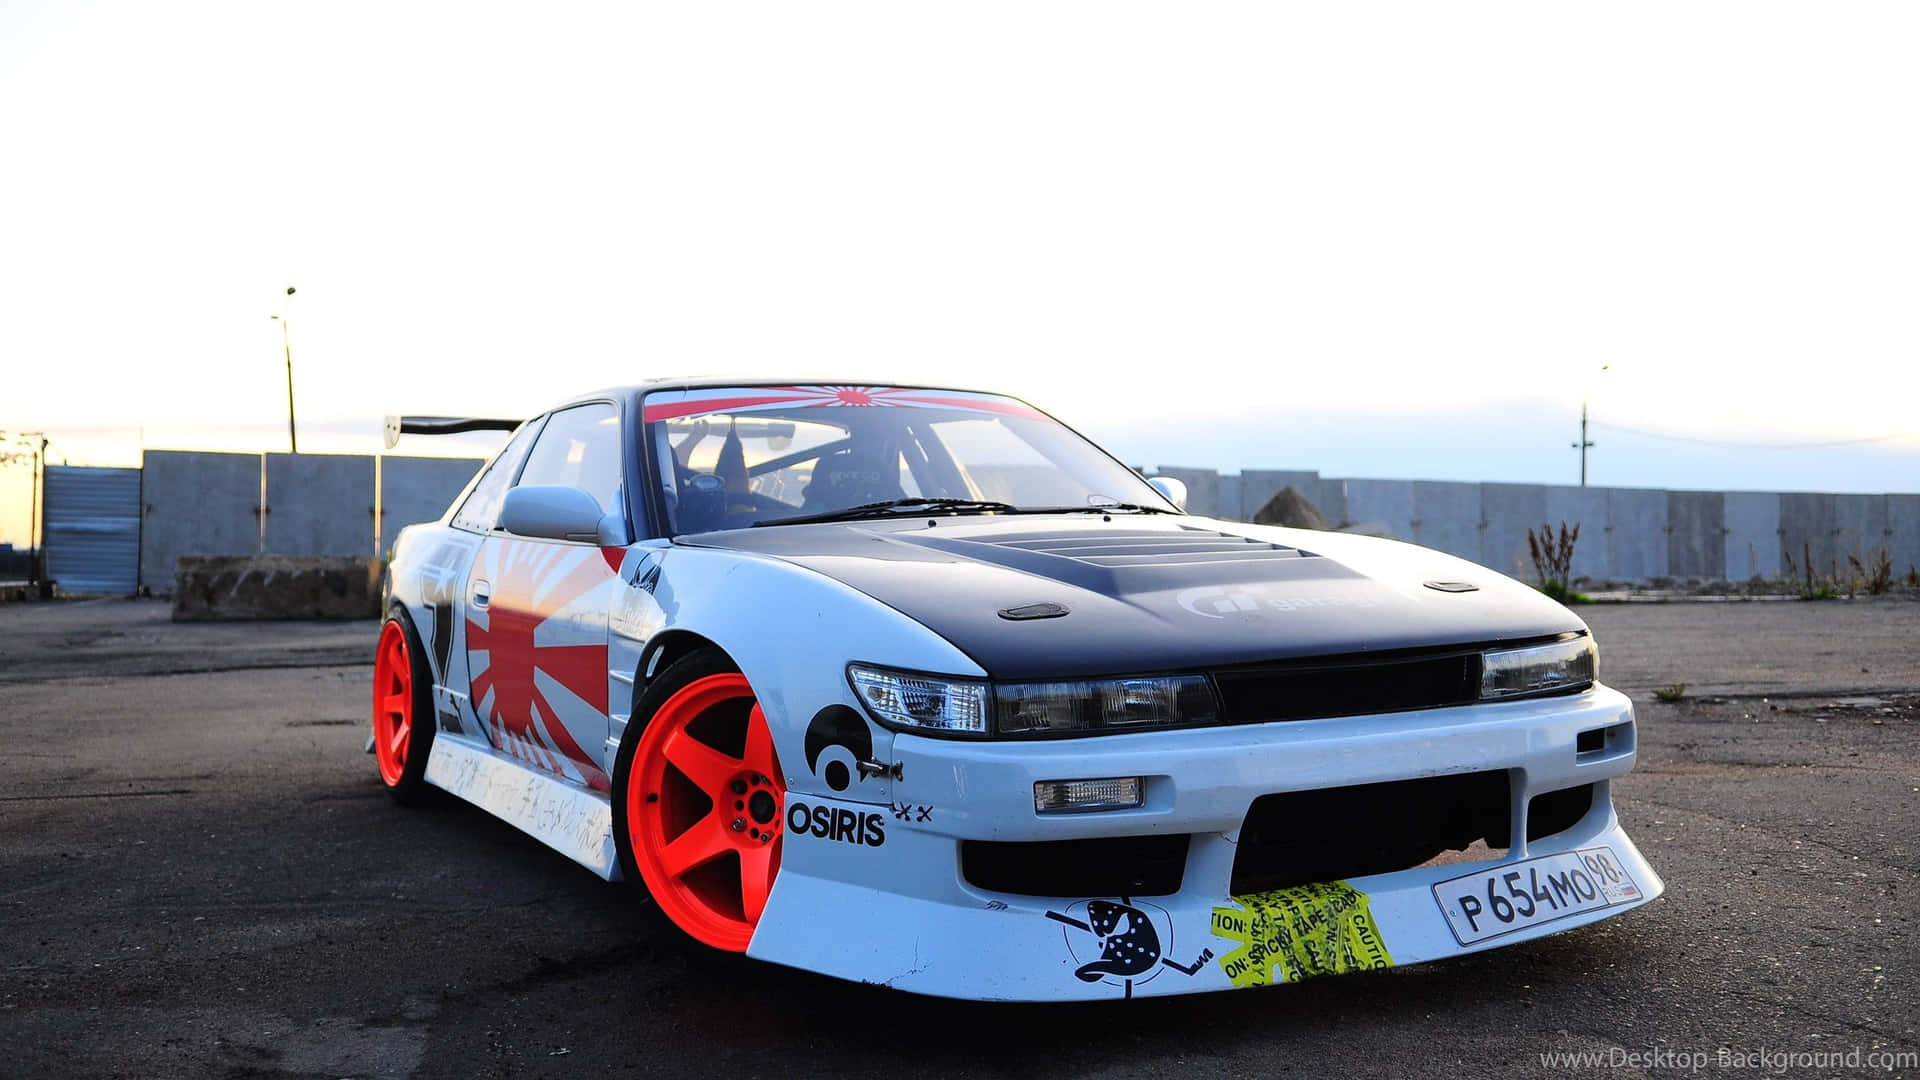 "The Iconic Nissan Silvia S13" Wallpaper